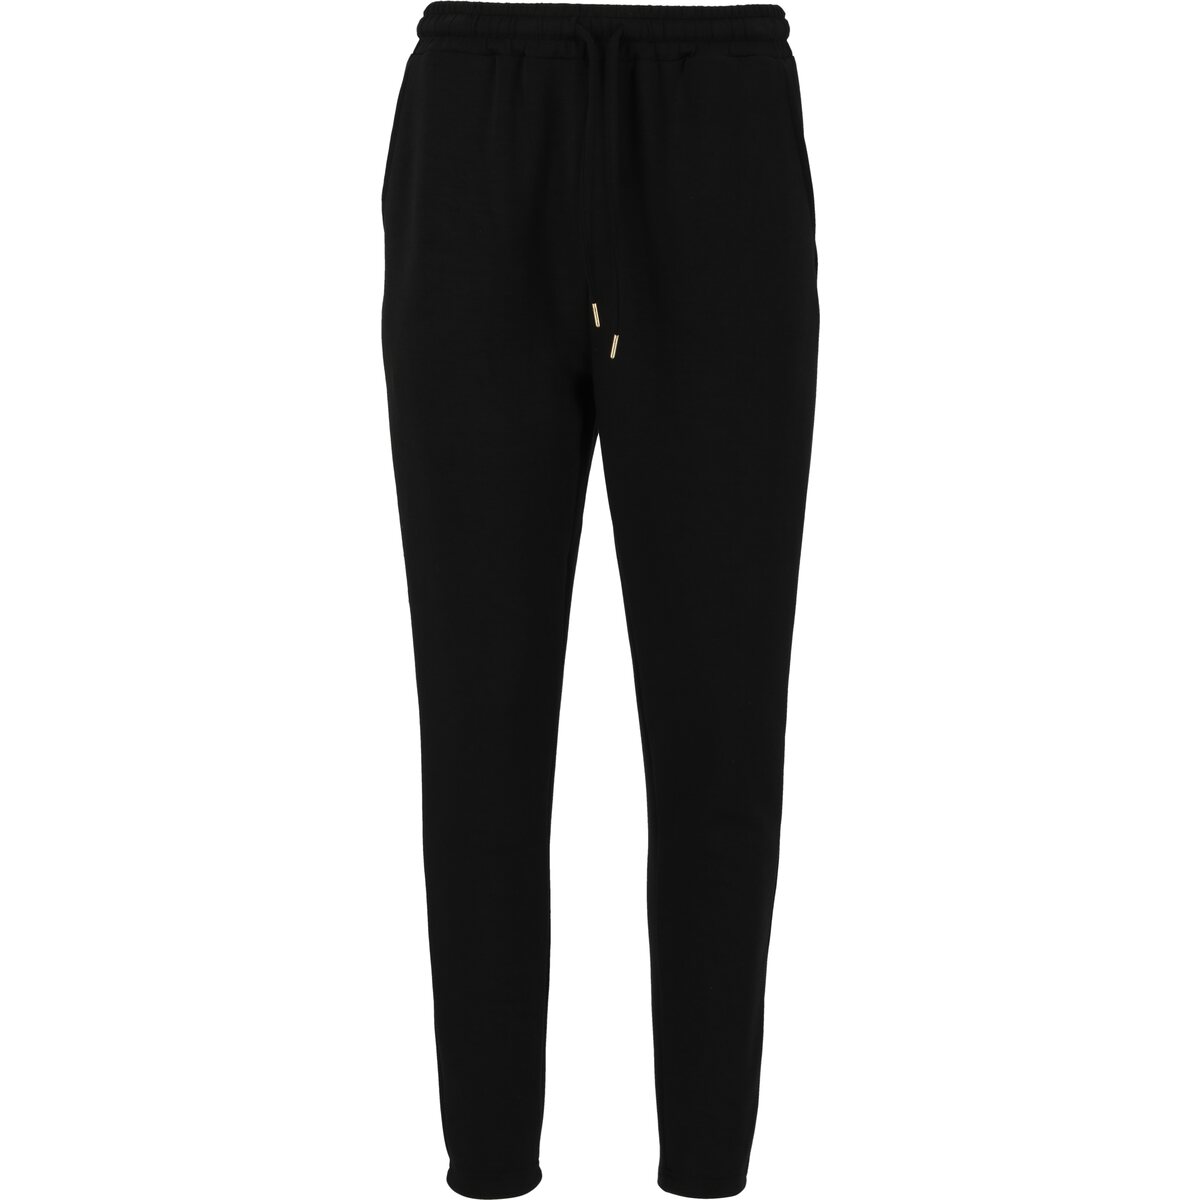 Athlecia Jacey V2 Womenswear Sweat Pants - Black 6 Shaws Department Stores